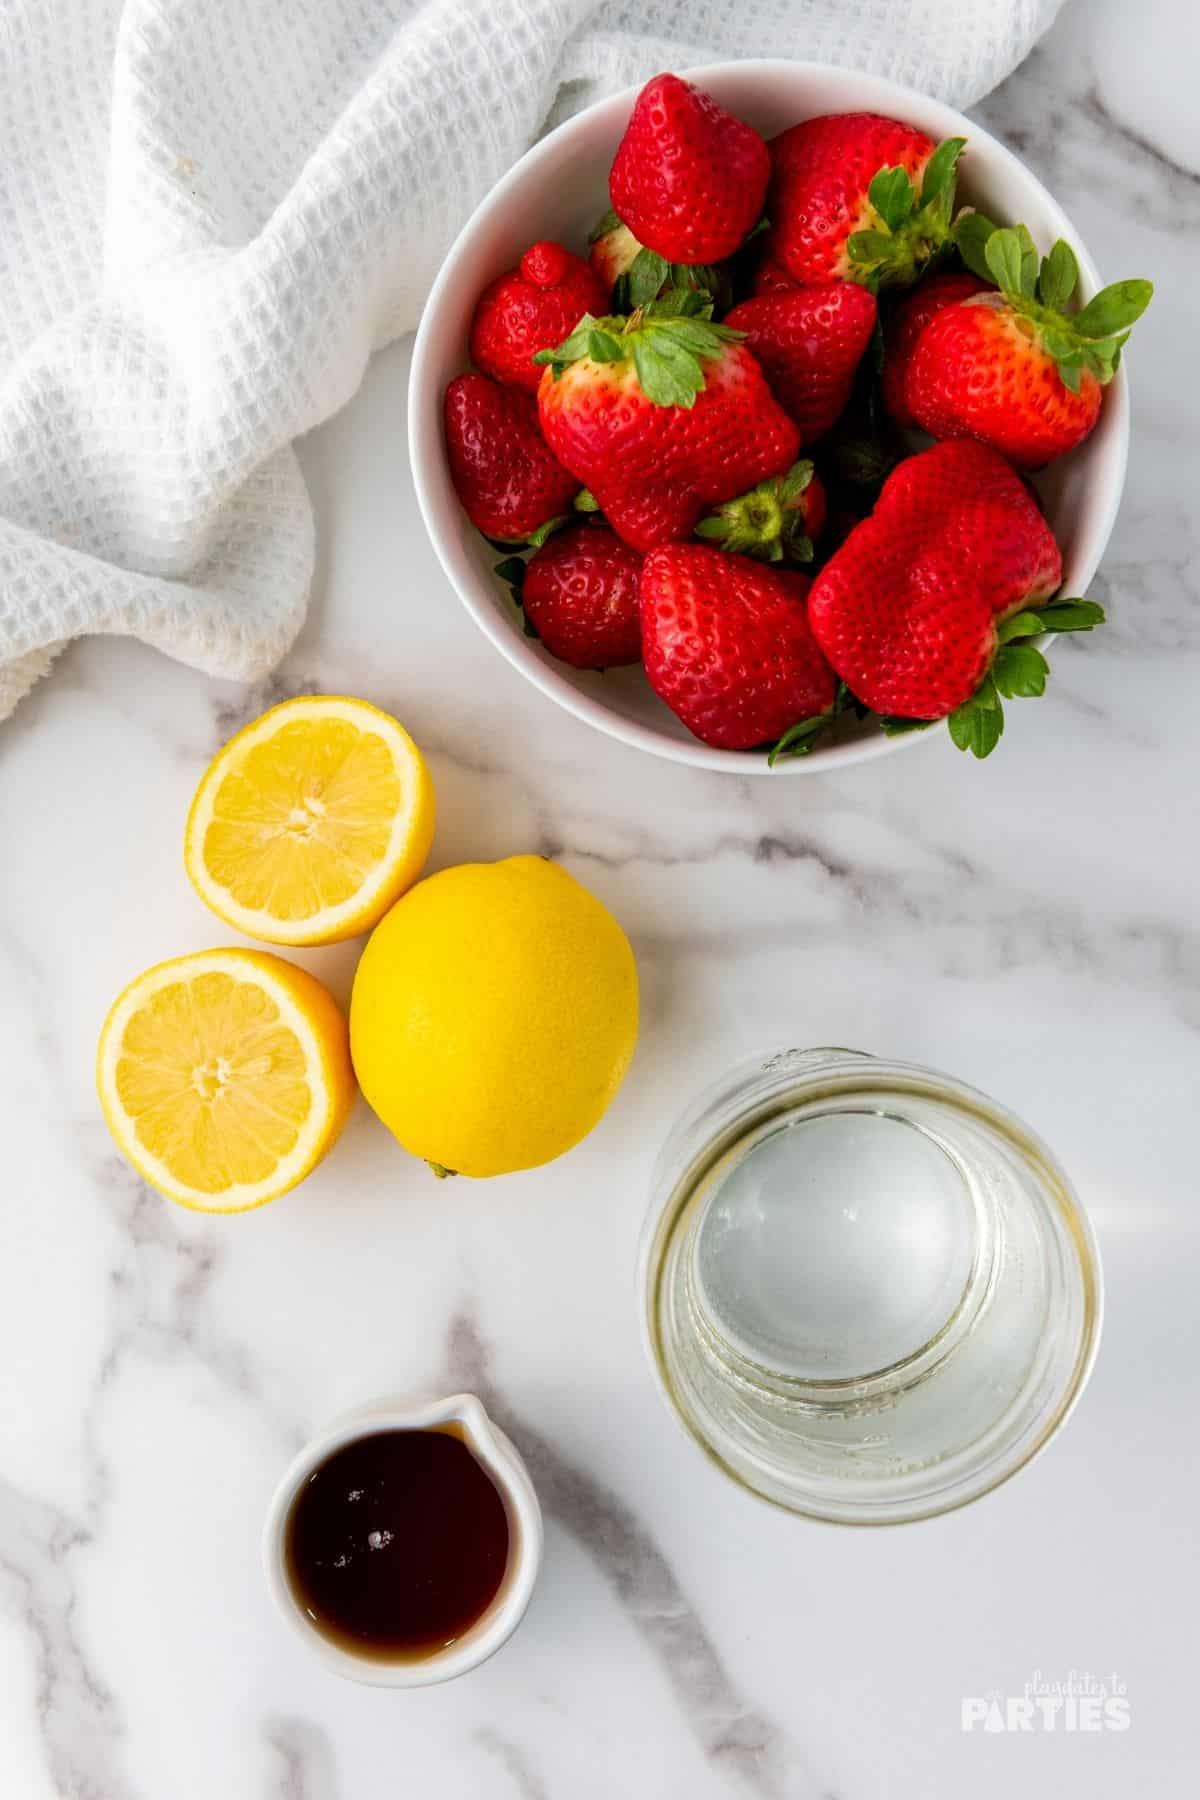 Ingredients include fresh strawberries, lemons, agave syrup, and water.